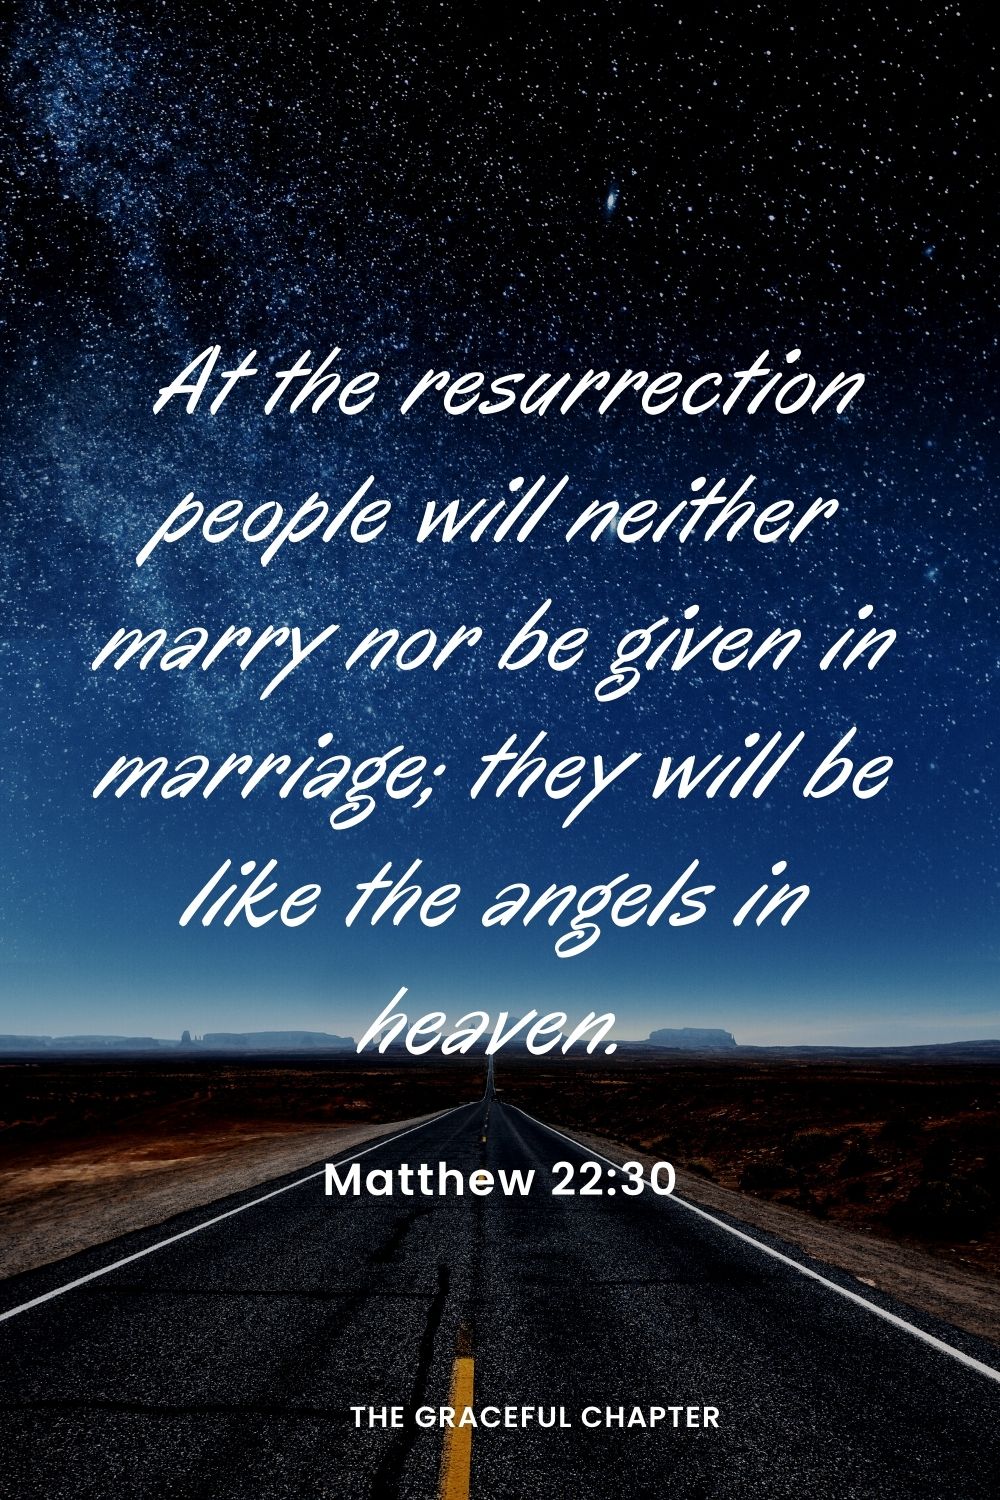 At the resurrection people will neither marry nor be given in marriage; they will be like the angels in heaven.